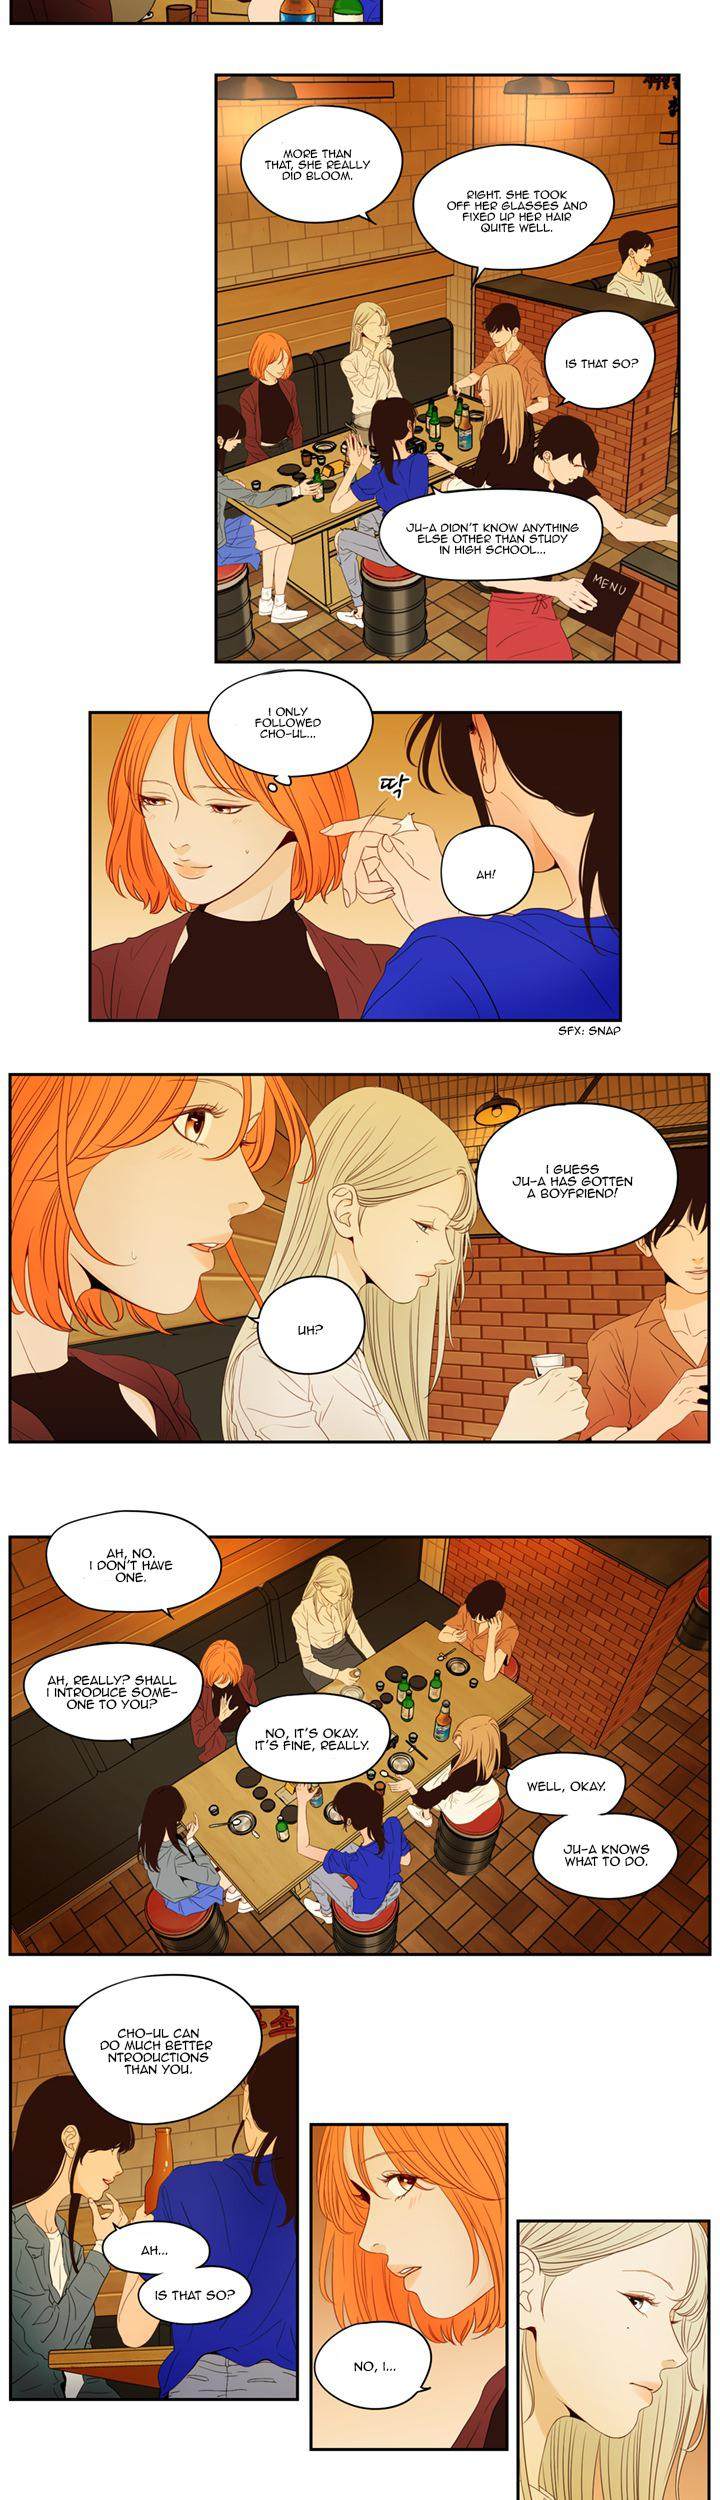 Pet’s Aesthetics - Chapter 4 Page 6